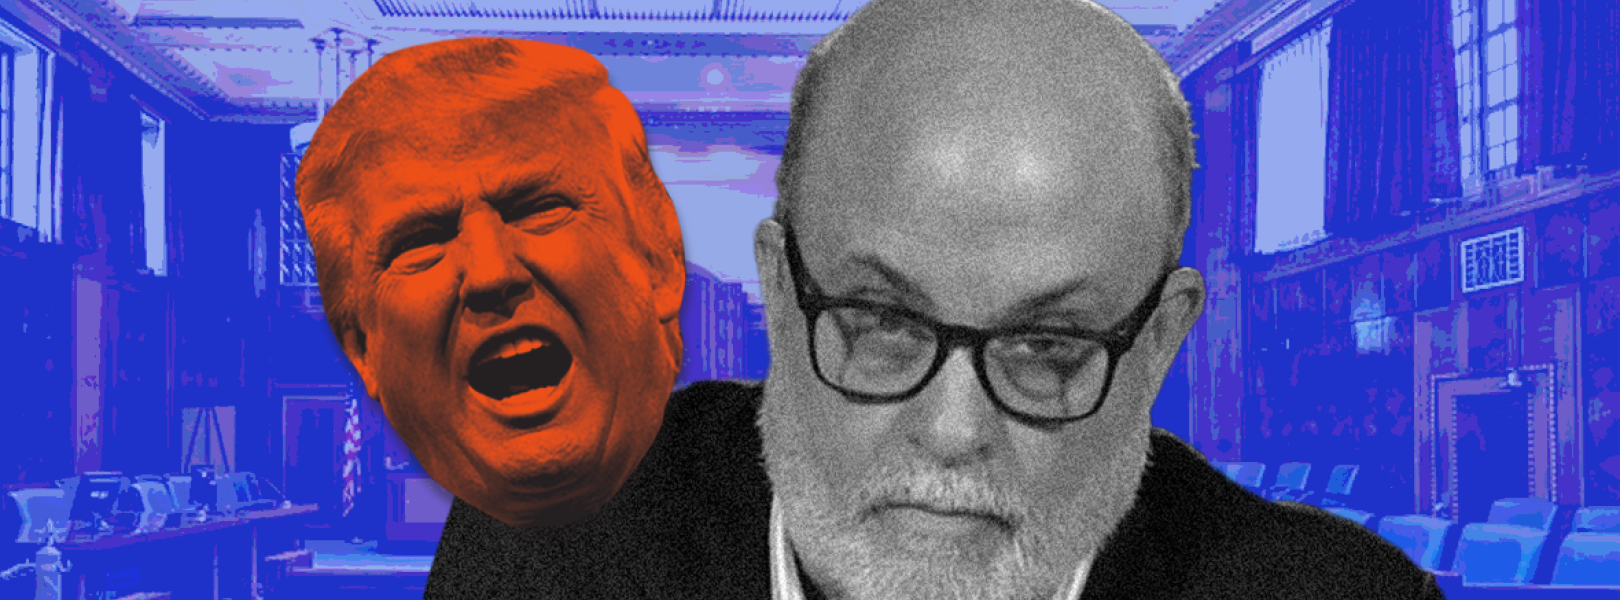 Mark Levin and Donald Trump in the foreground of a state legislature